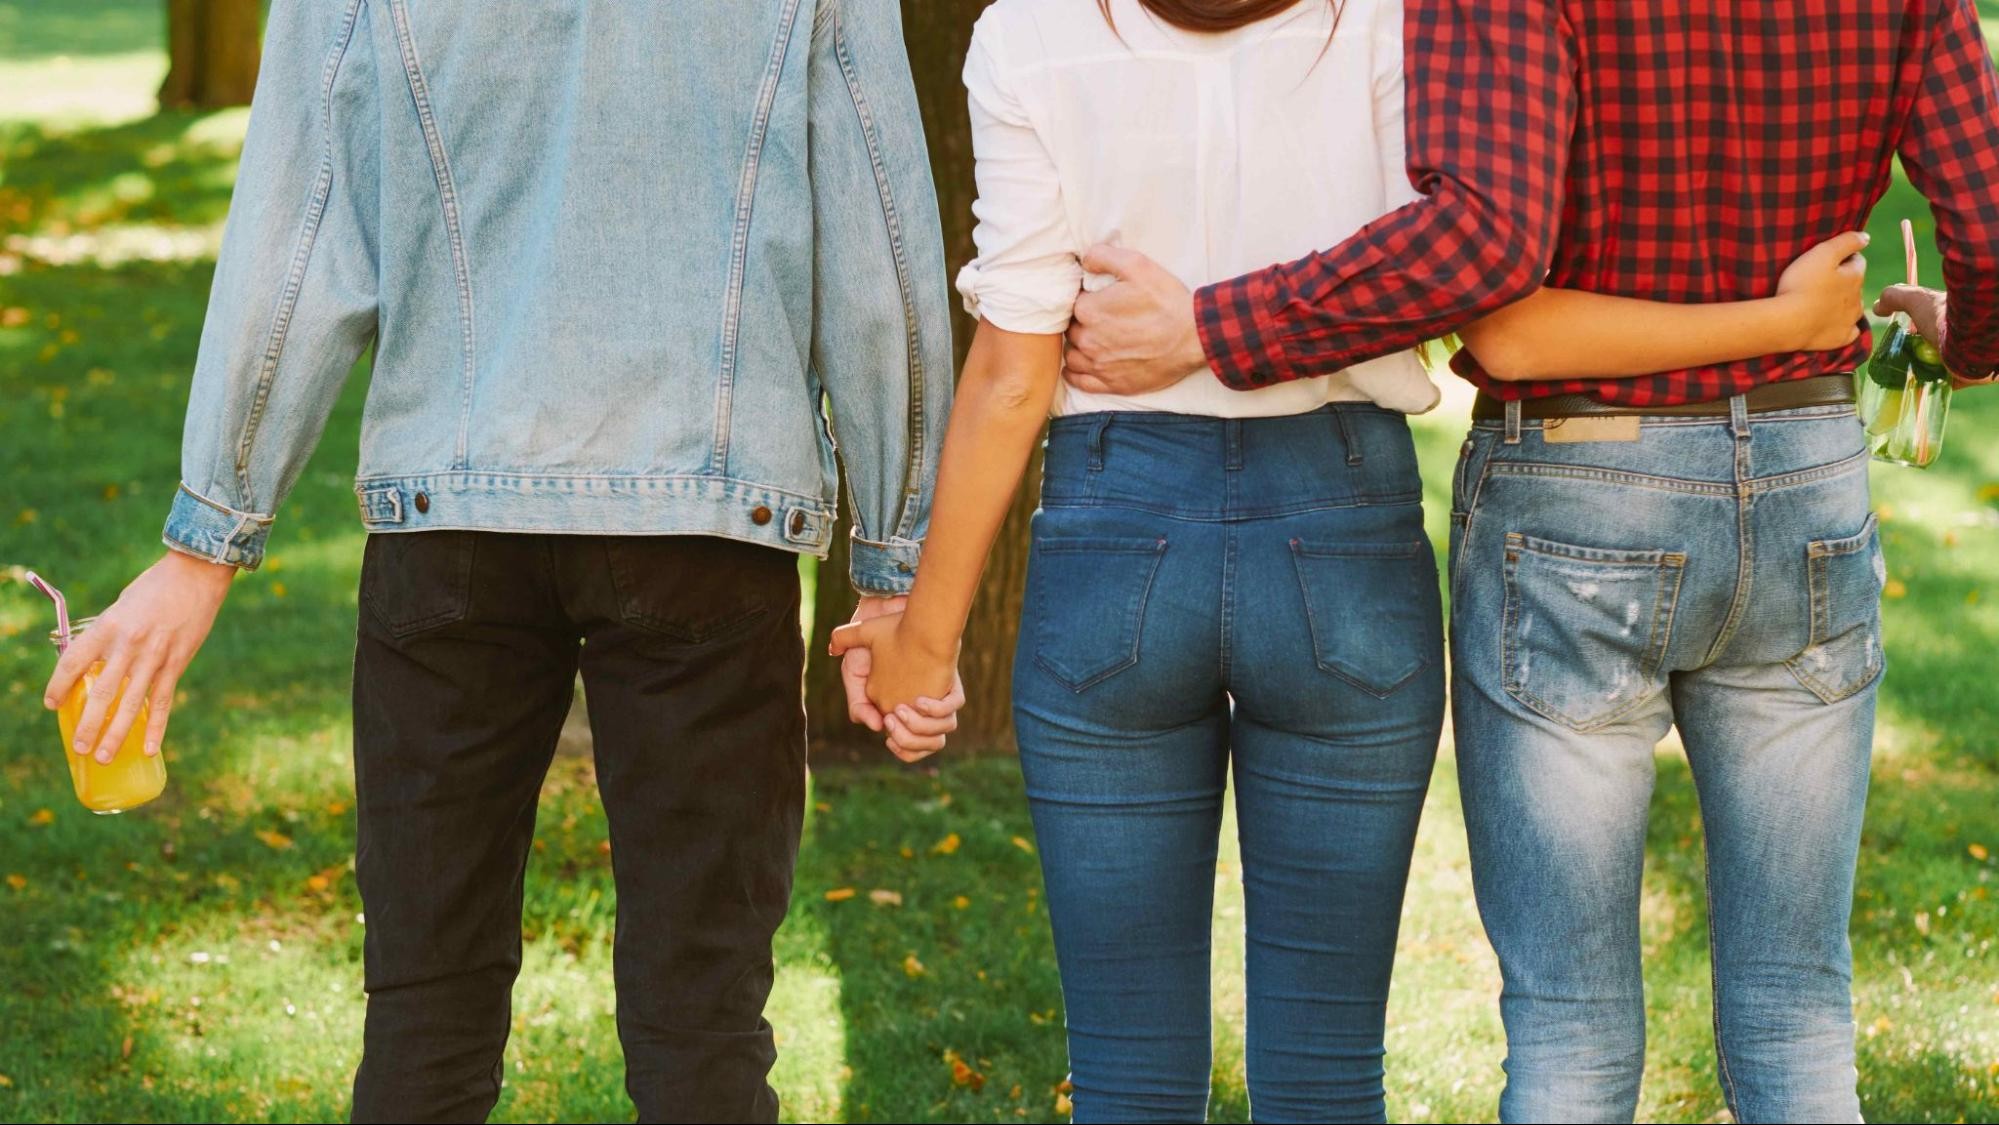 Polyamorous in Portland: the city making open relationships easy